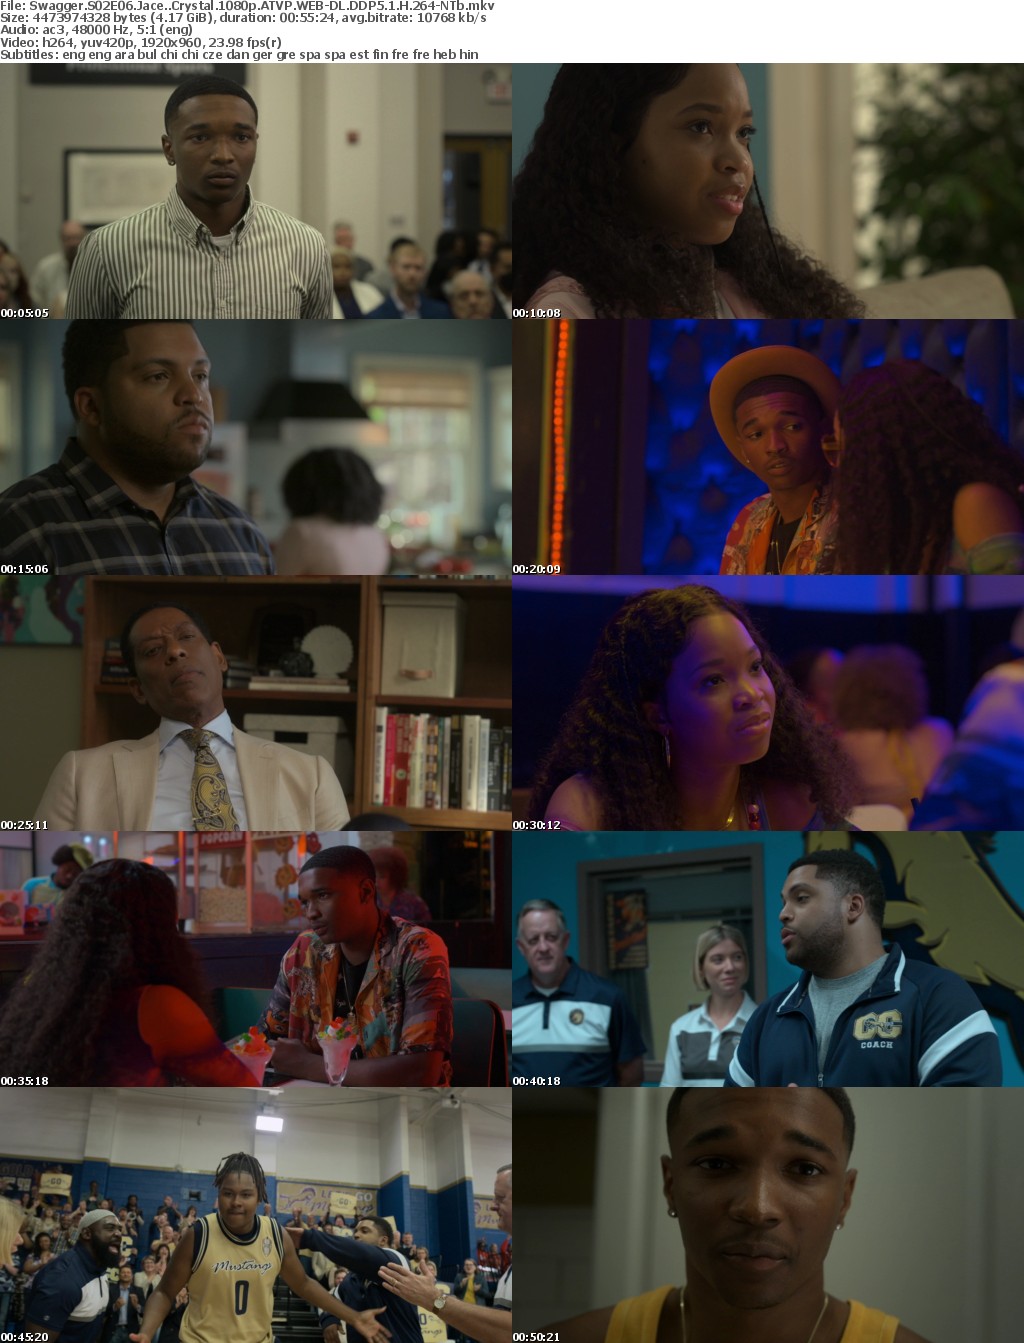 Swagger S02E06 Jace Crystal 1080p ATVP WEB-DL DDP5 1 H 264-NTb